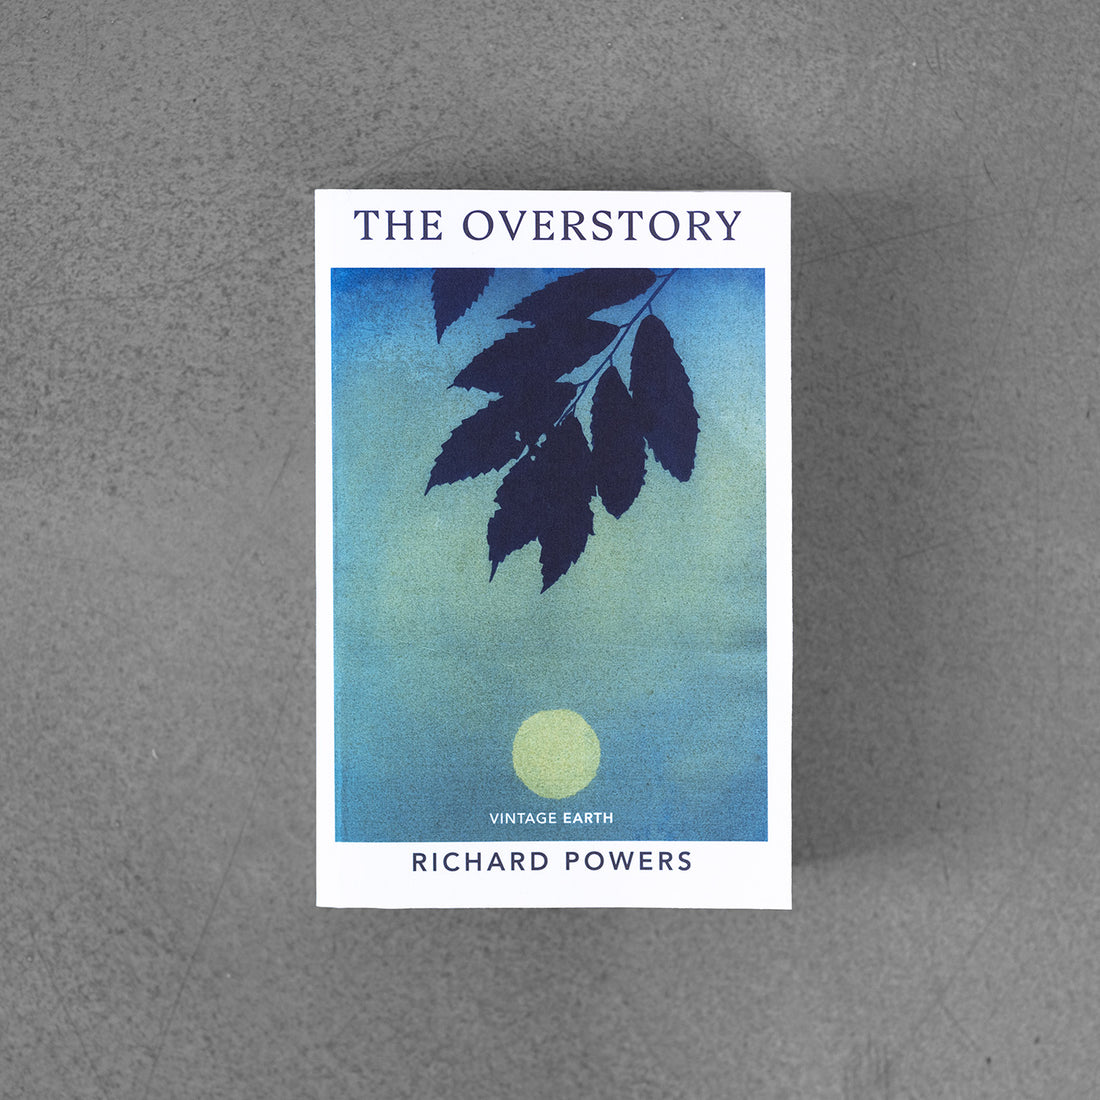 Overstory - Richard Powers (Vintage Eart collection)